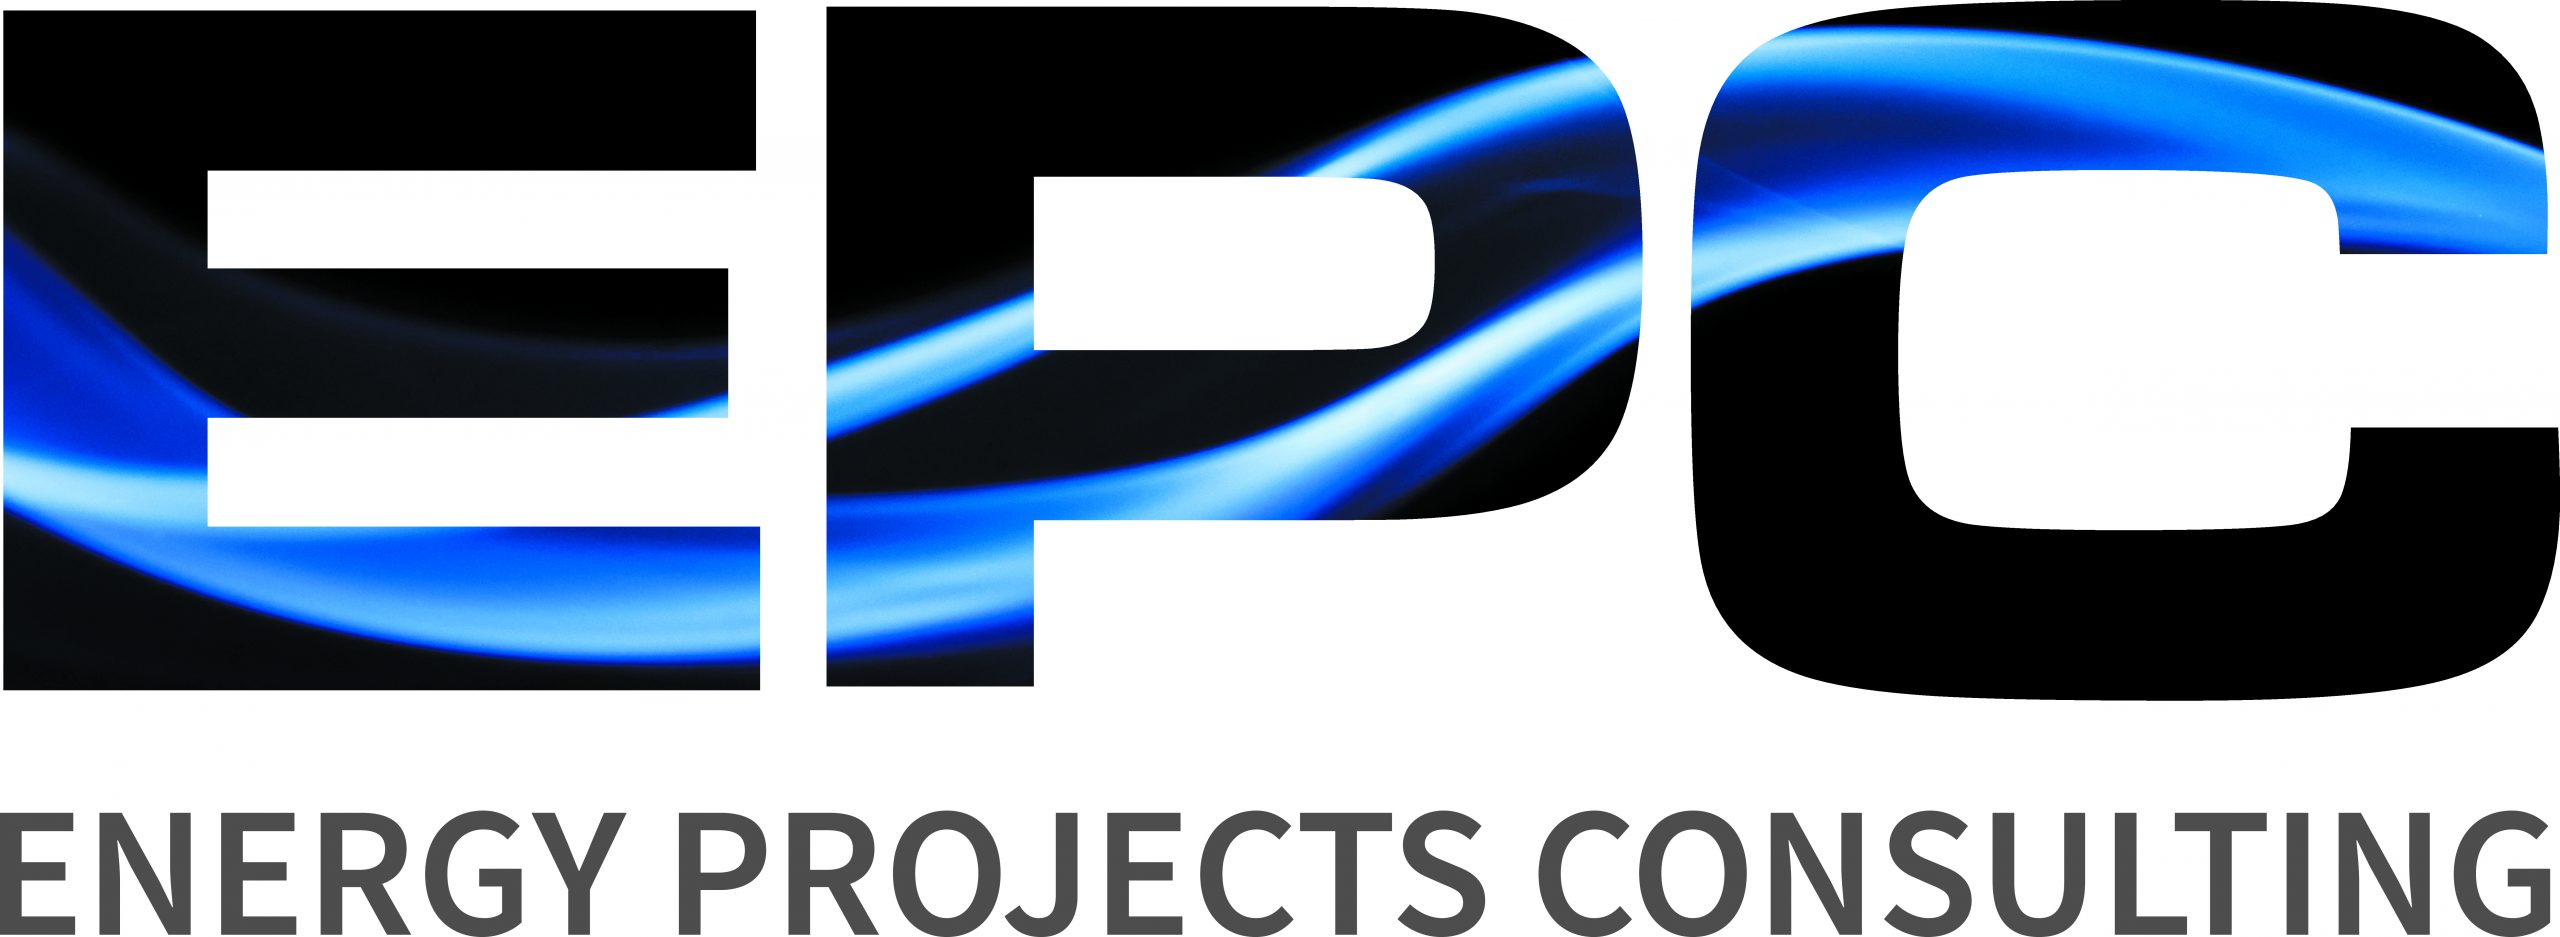 Energy Projects Consulting Logo